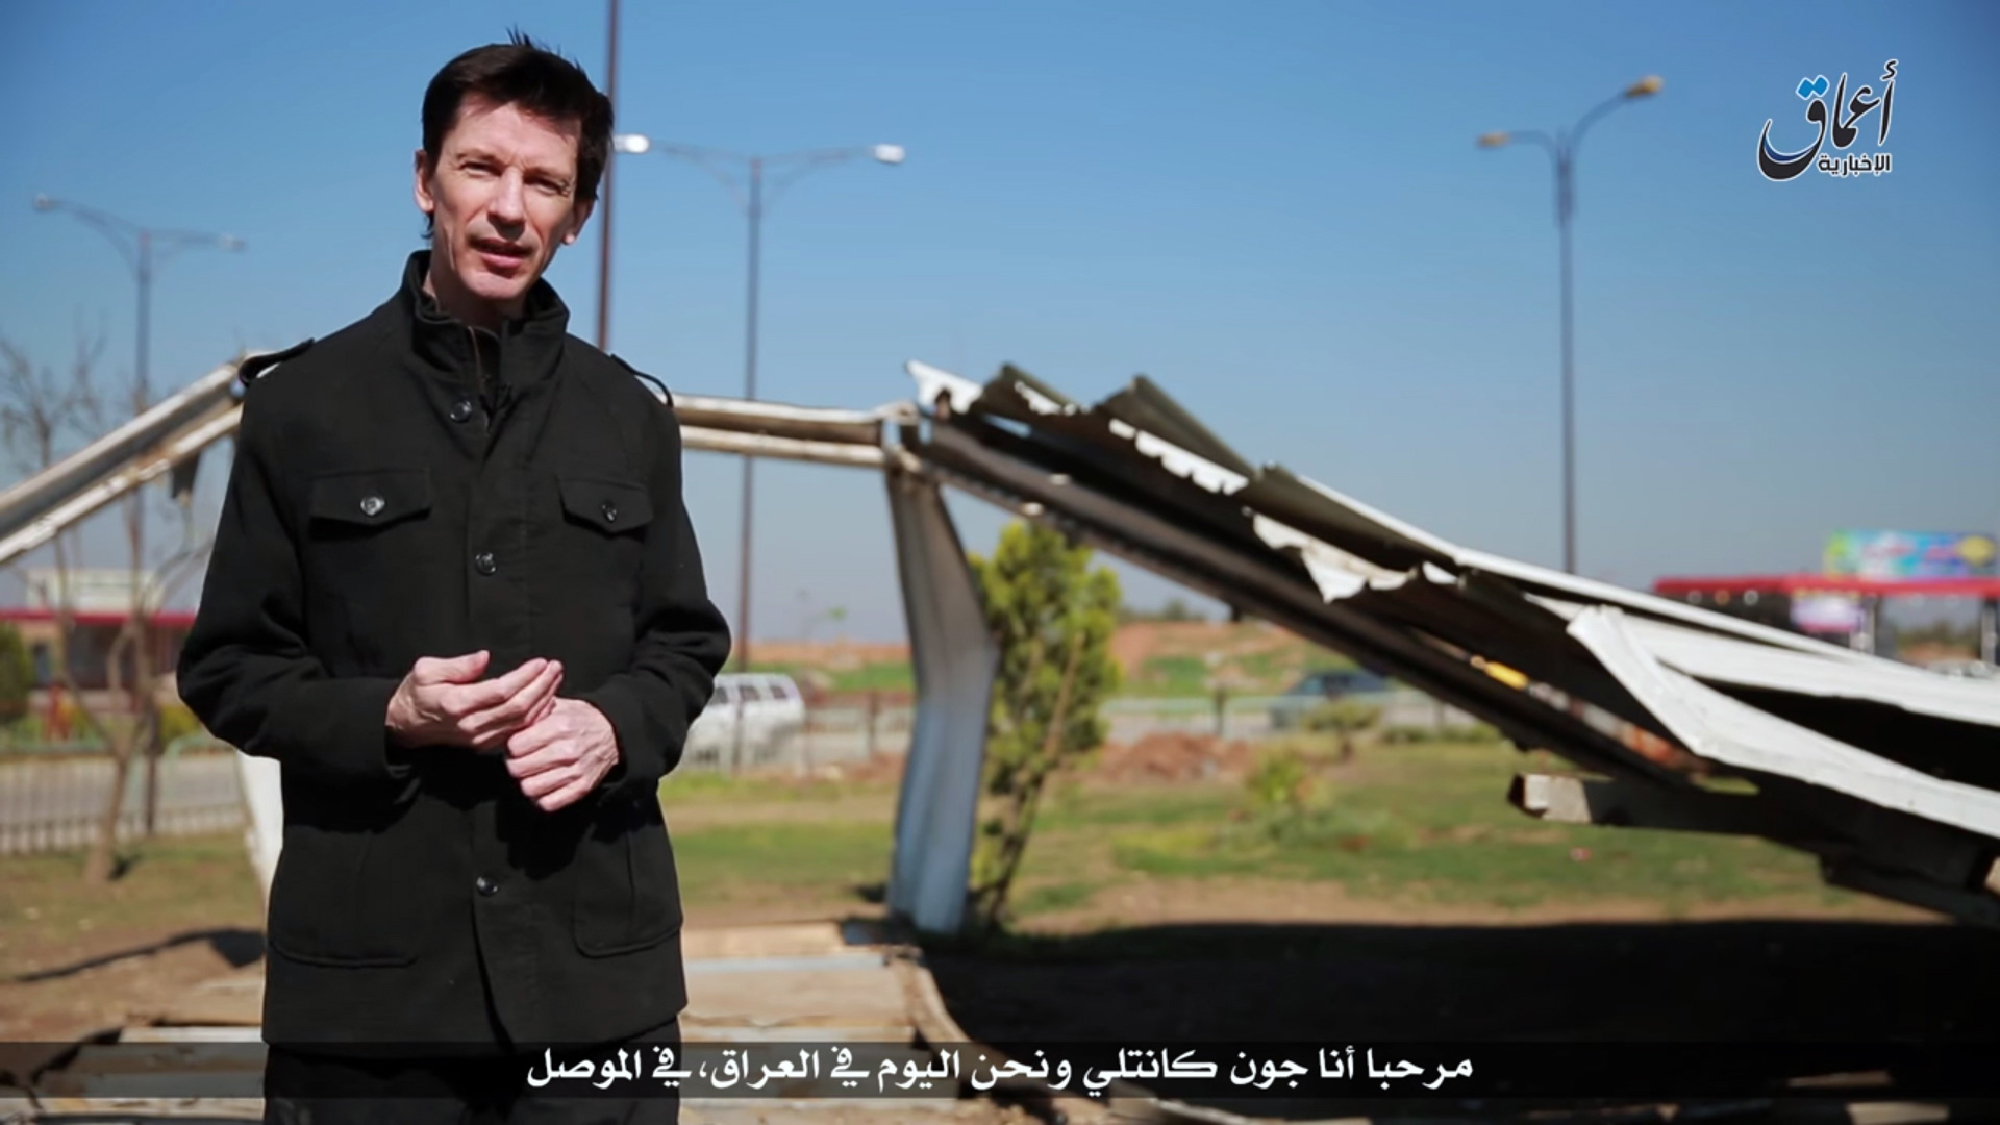 An image grab taken from a video uploaded on March 19, 2016 by Amaq News Agency, a Youtube channel which posts videos from areas under the Islamic State (IS) group's control, shows British journalist John Cantlie, who is being held prisoner by IS, speaking to the camera in the style of a news report supposedly filmed in the militants' northern Iraqi stronghold of Mosul (AFP)